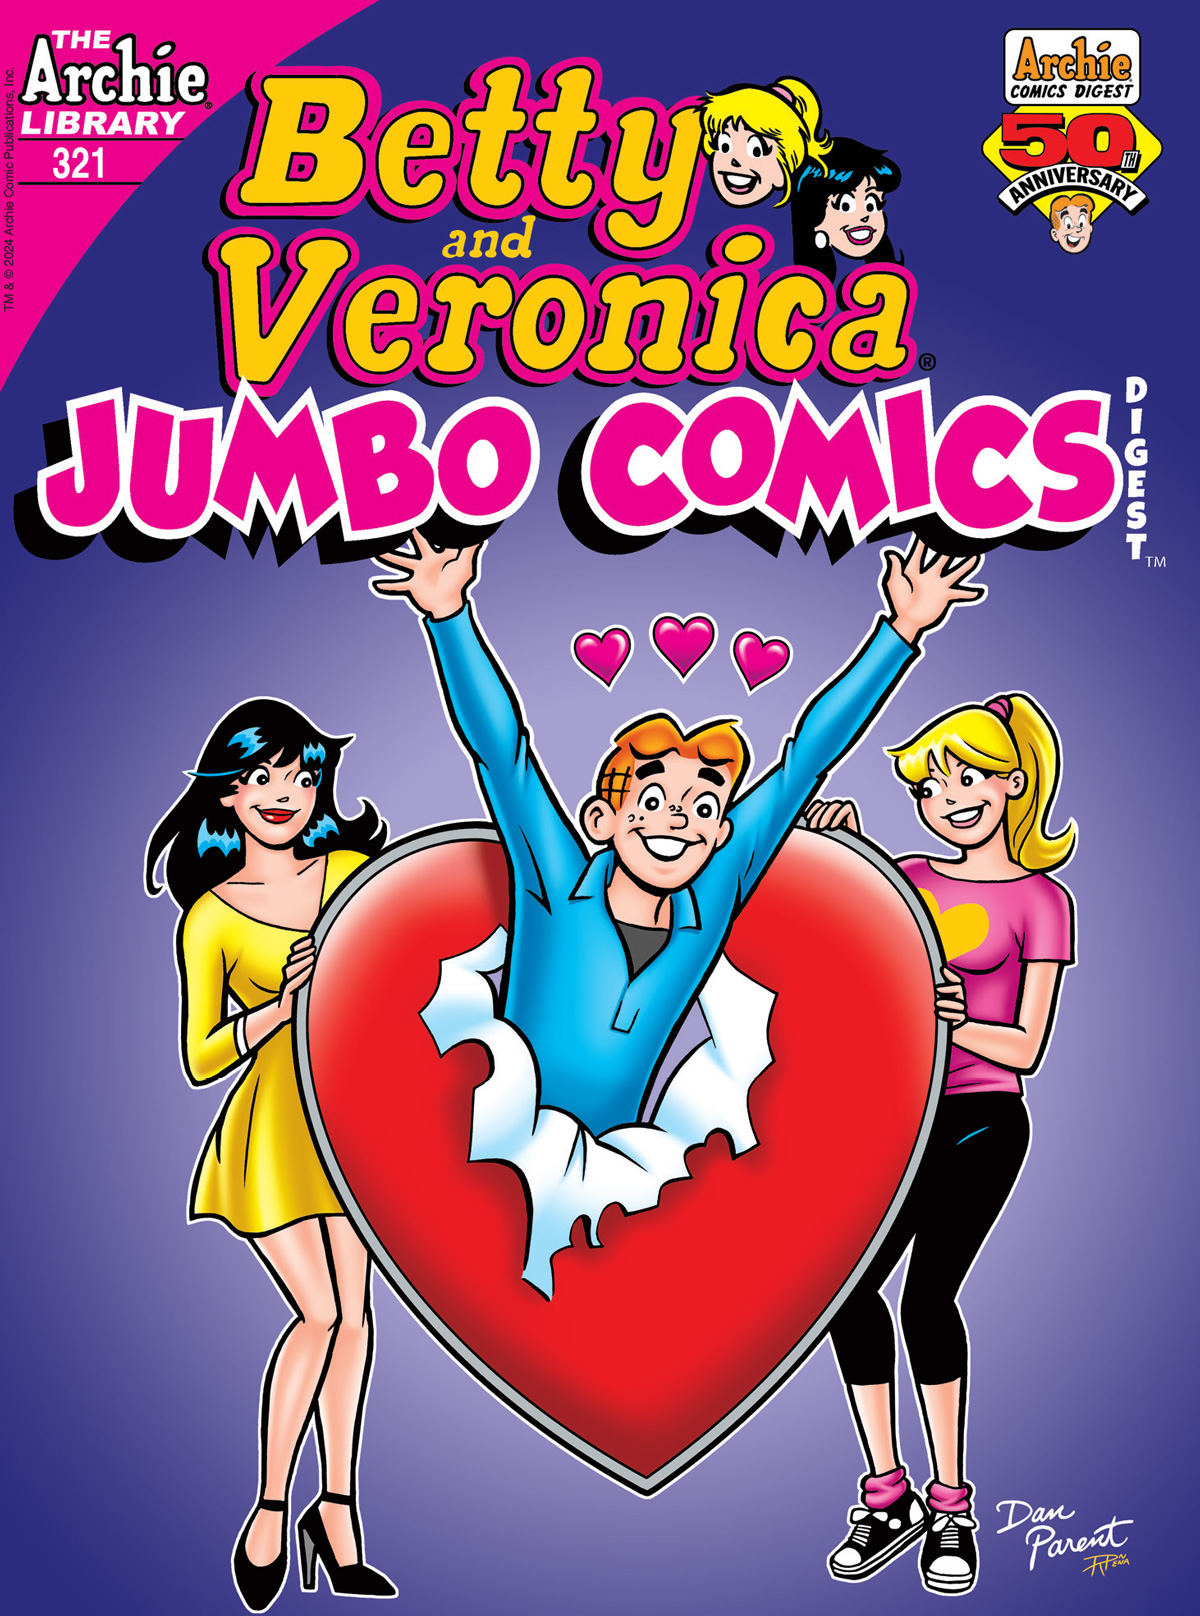 The cover of Betty and Veronica Jumbo Comics Digest #321